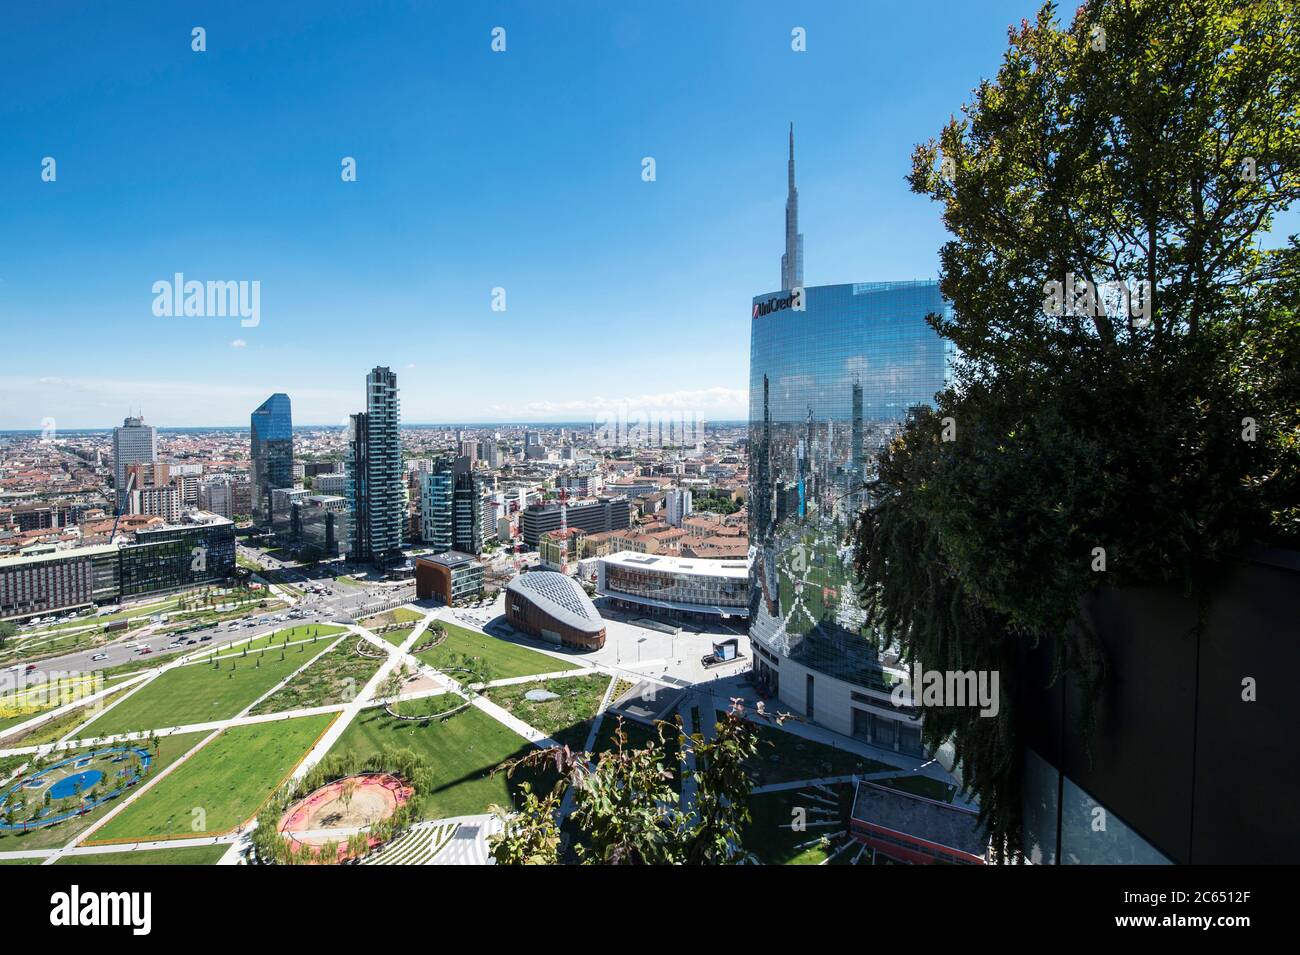 Italy, Lombardy, Milan, cityscape with Unicredit Tower and Biblioteca degli Alberi Park Stock Photo